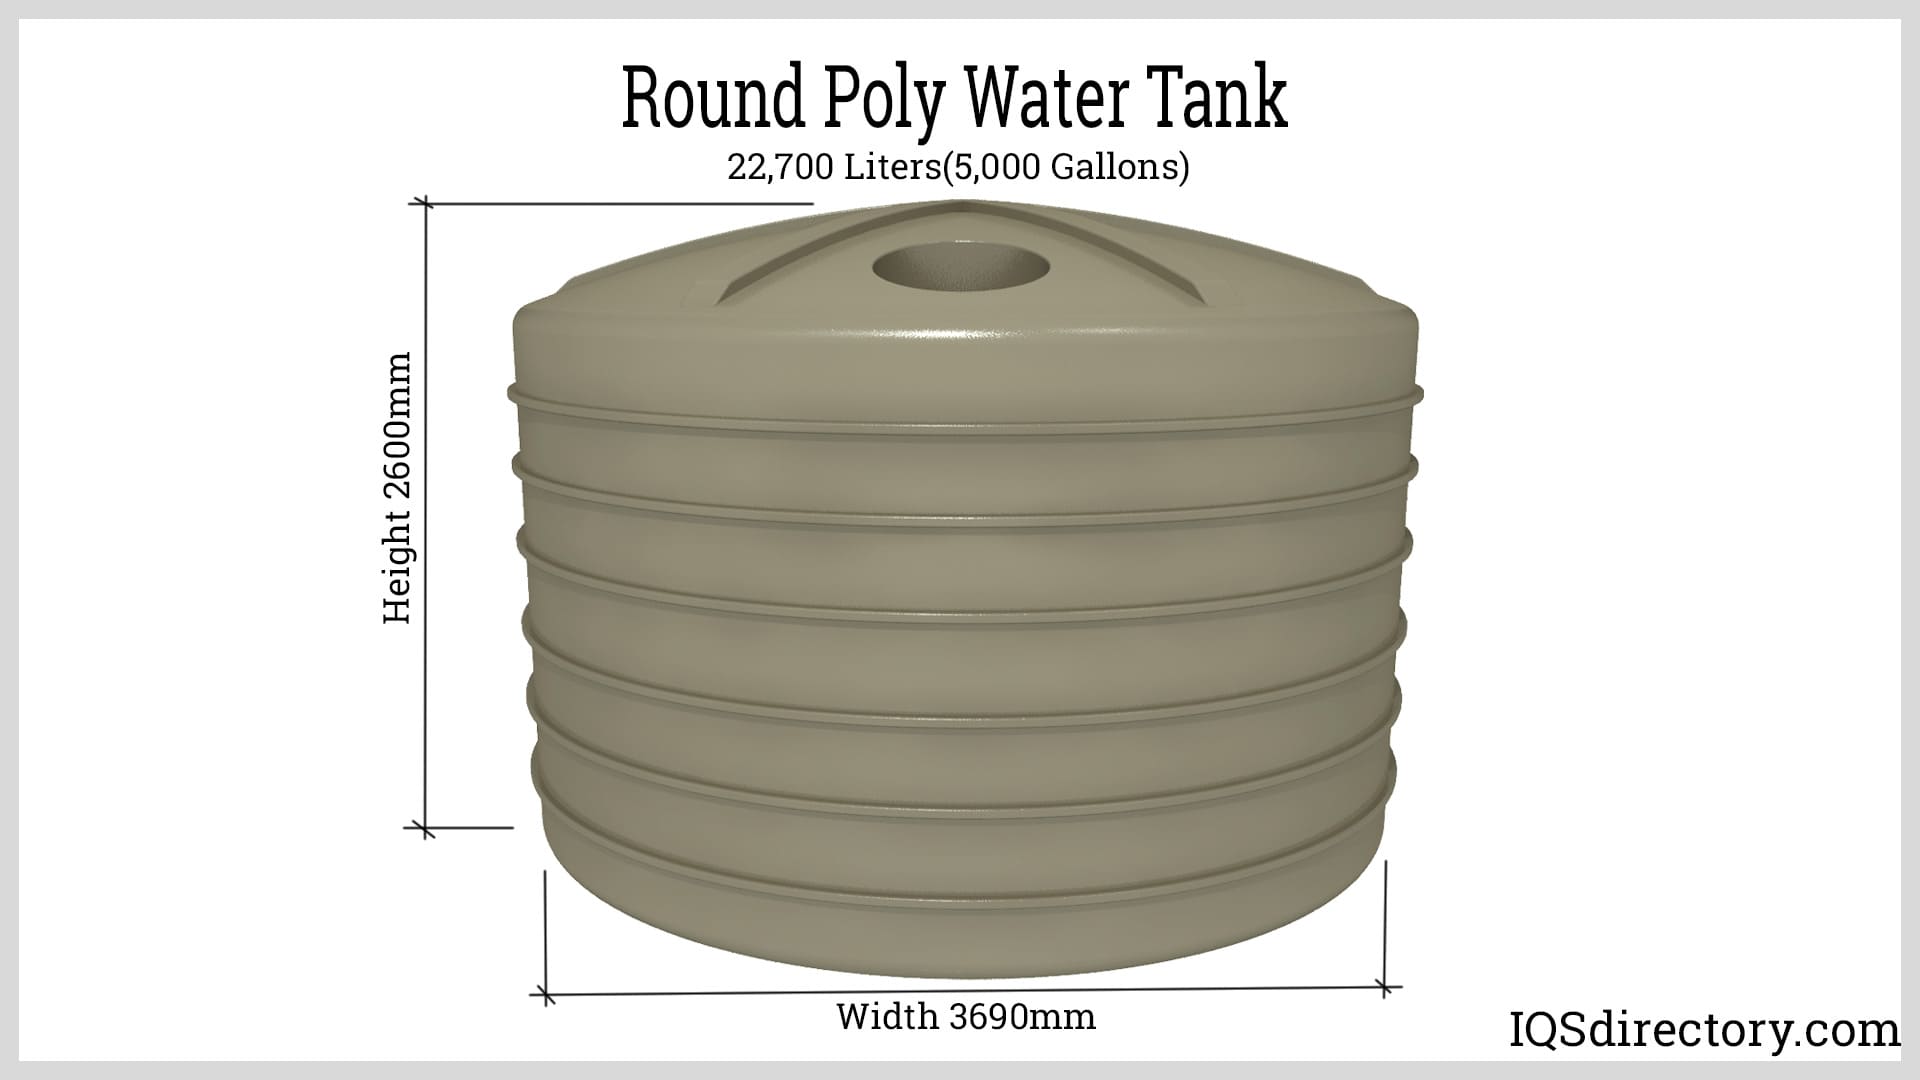 Round Poly Water Tank